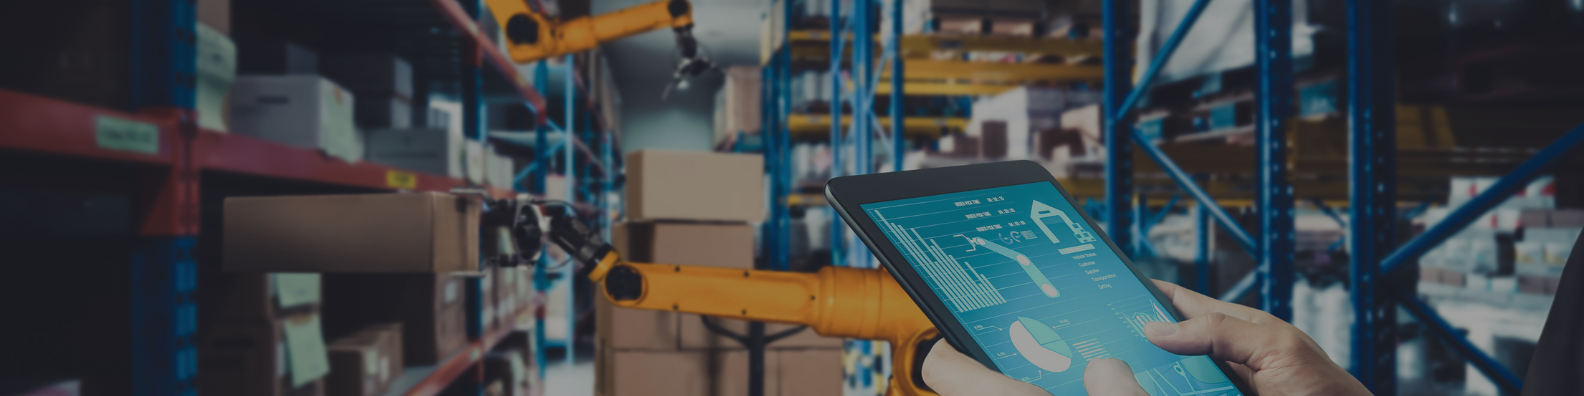 The Challenges and Opportunities of Warehouse Automation: A Conversation with Brittain Ladd and Callum Brady